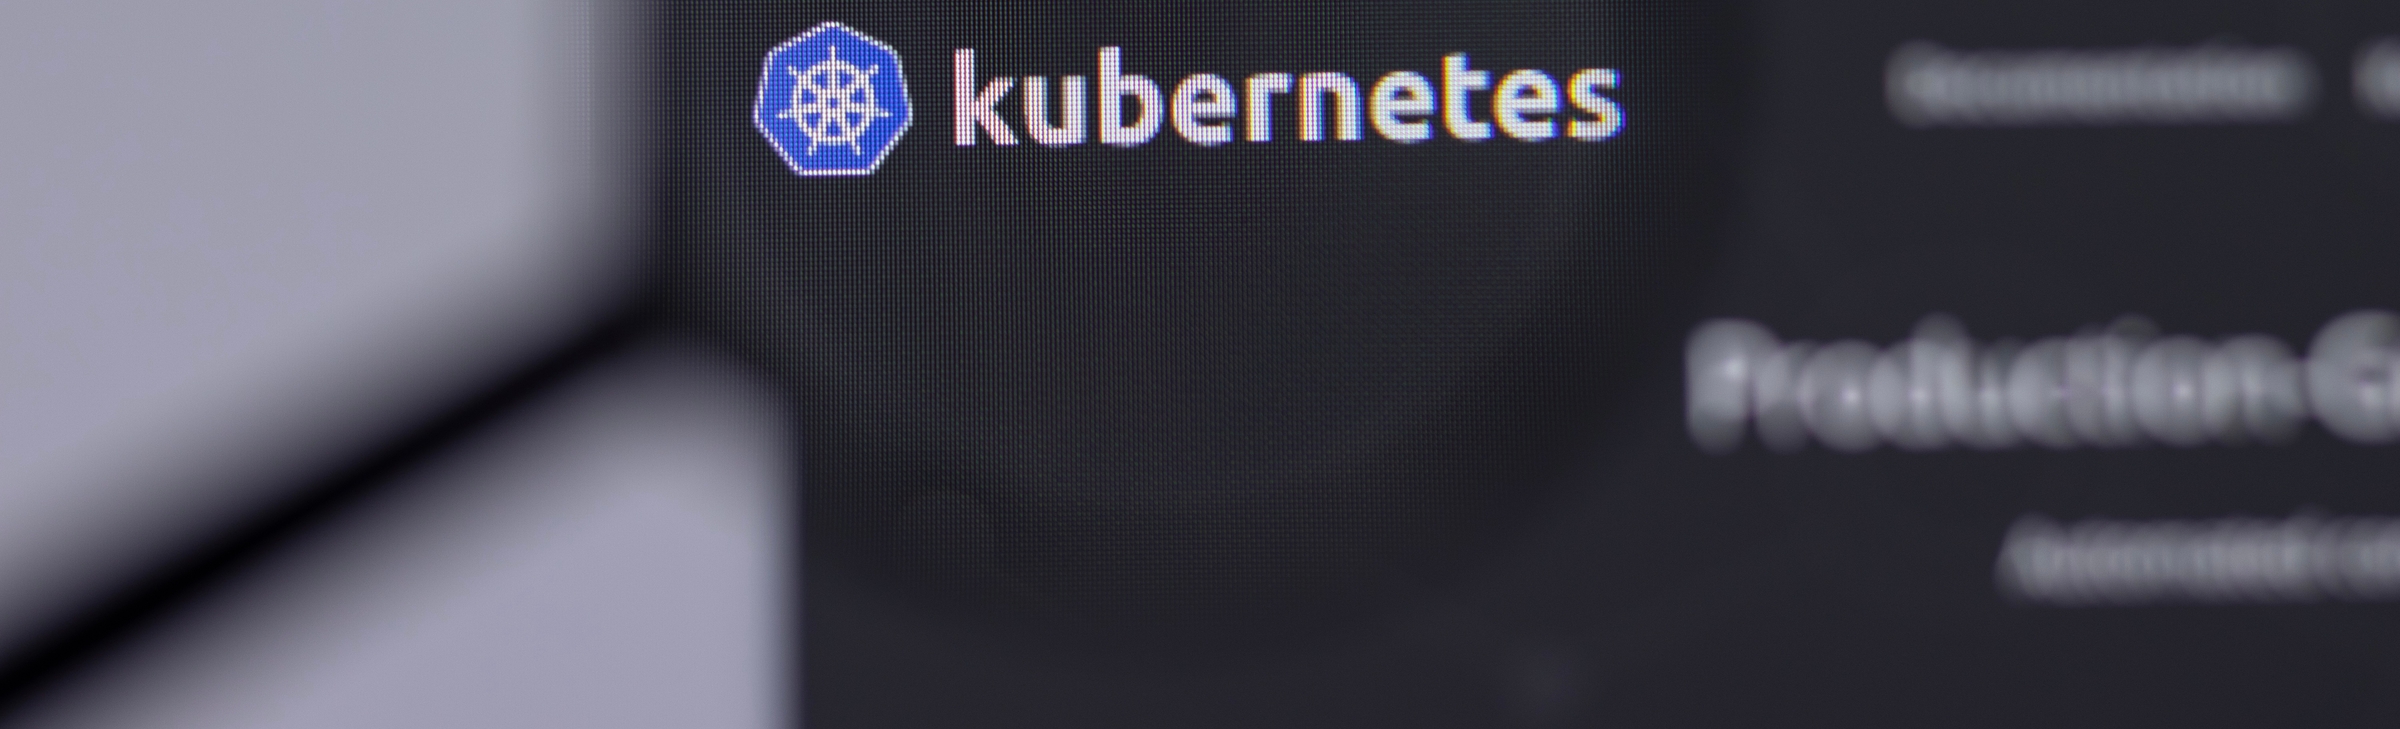 The role of Kubernetes in digital transformation